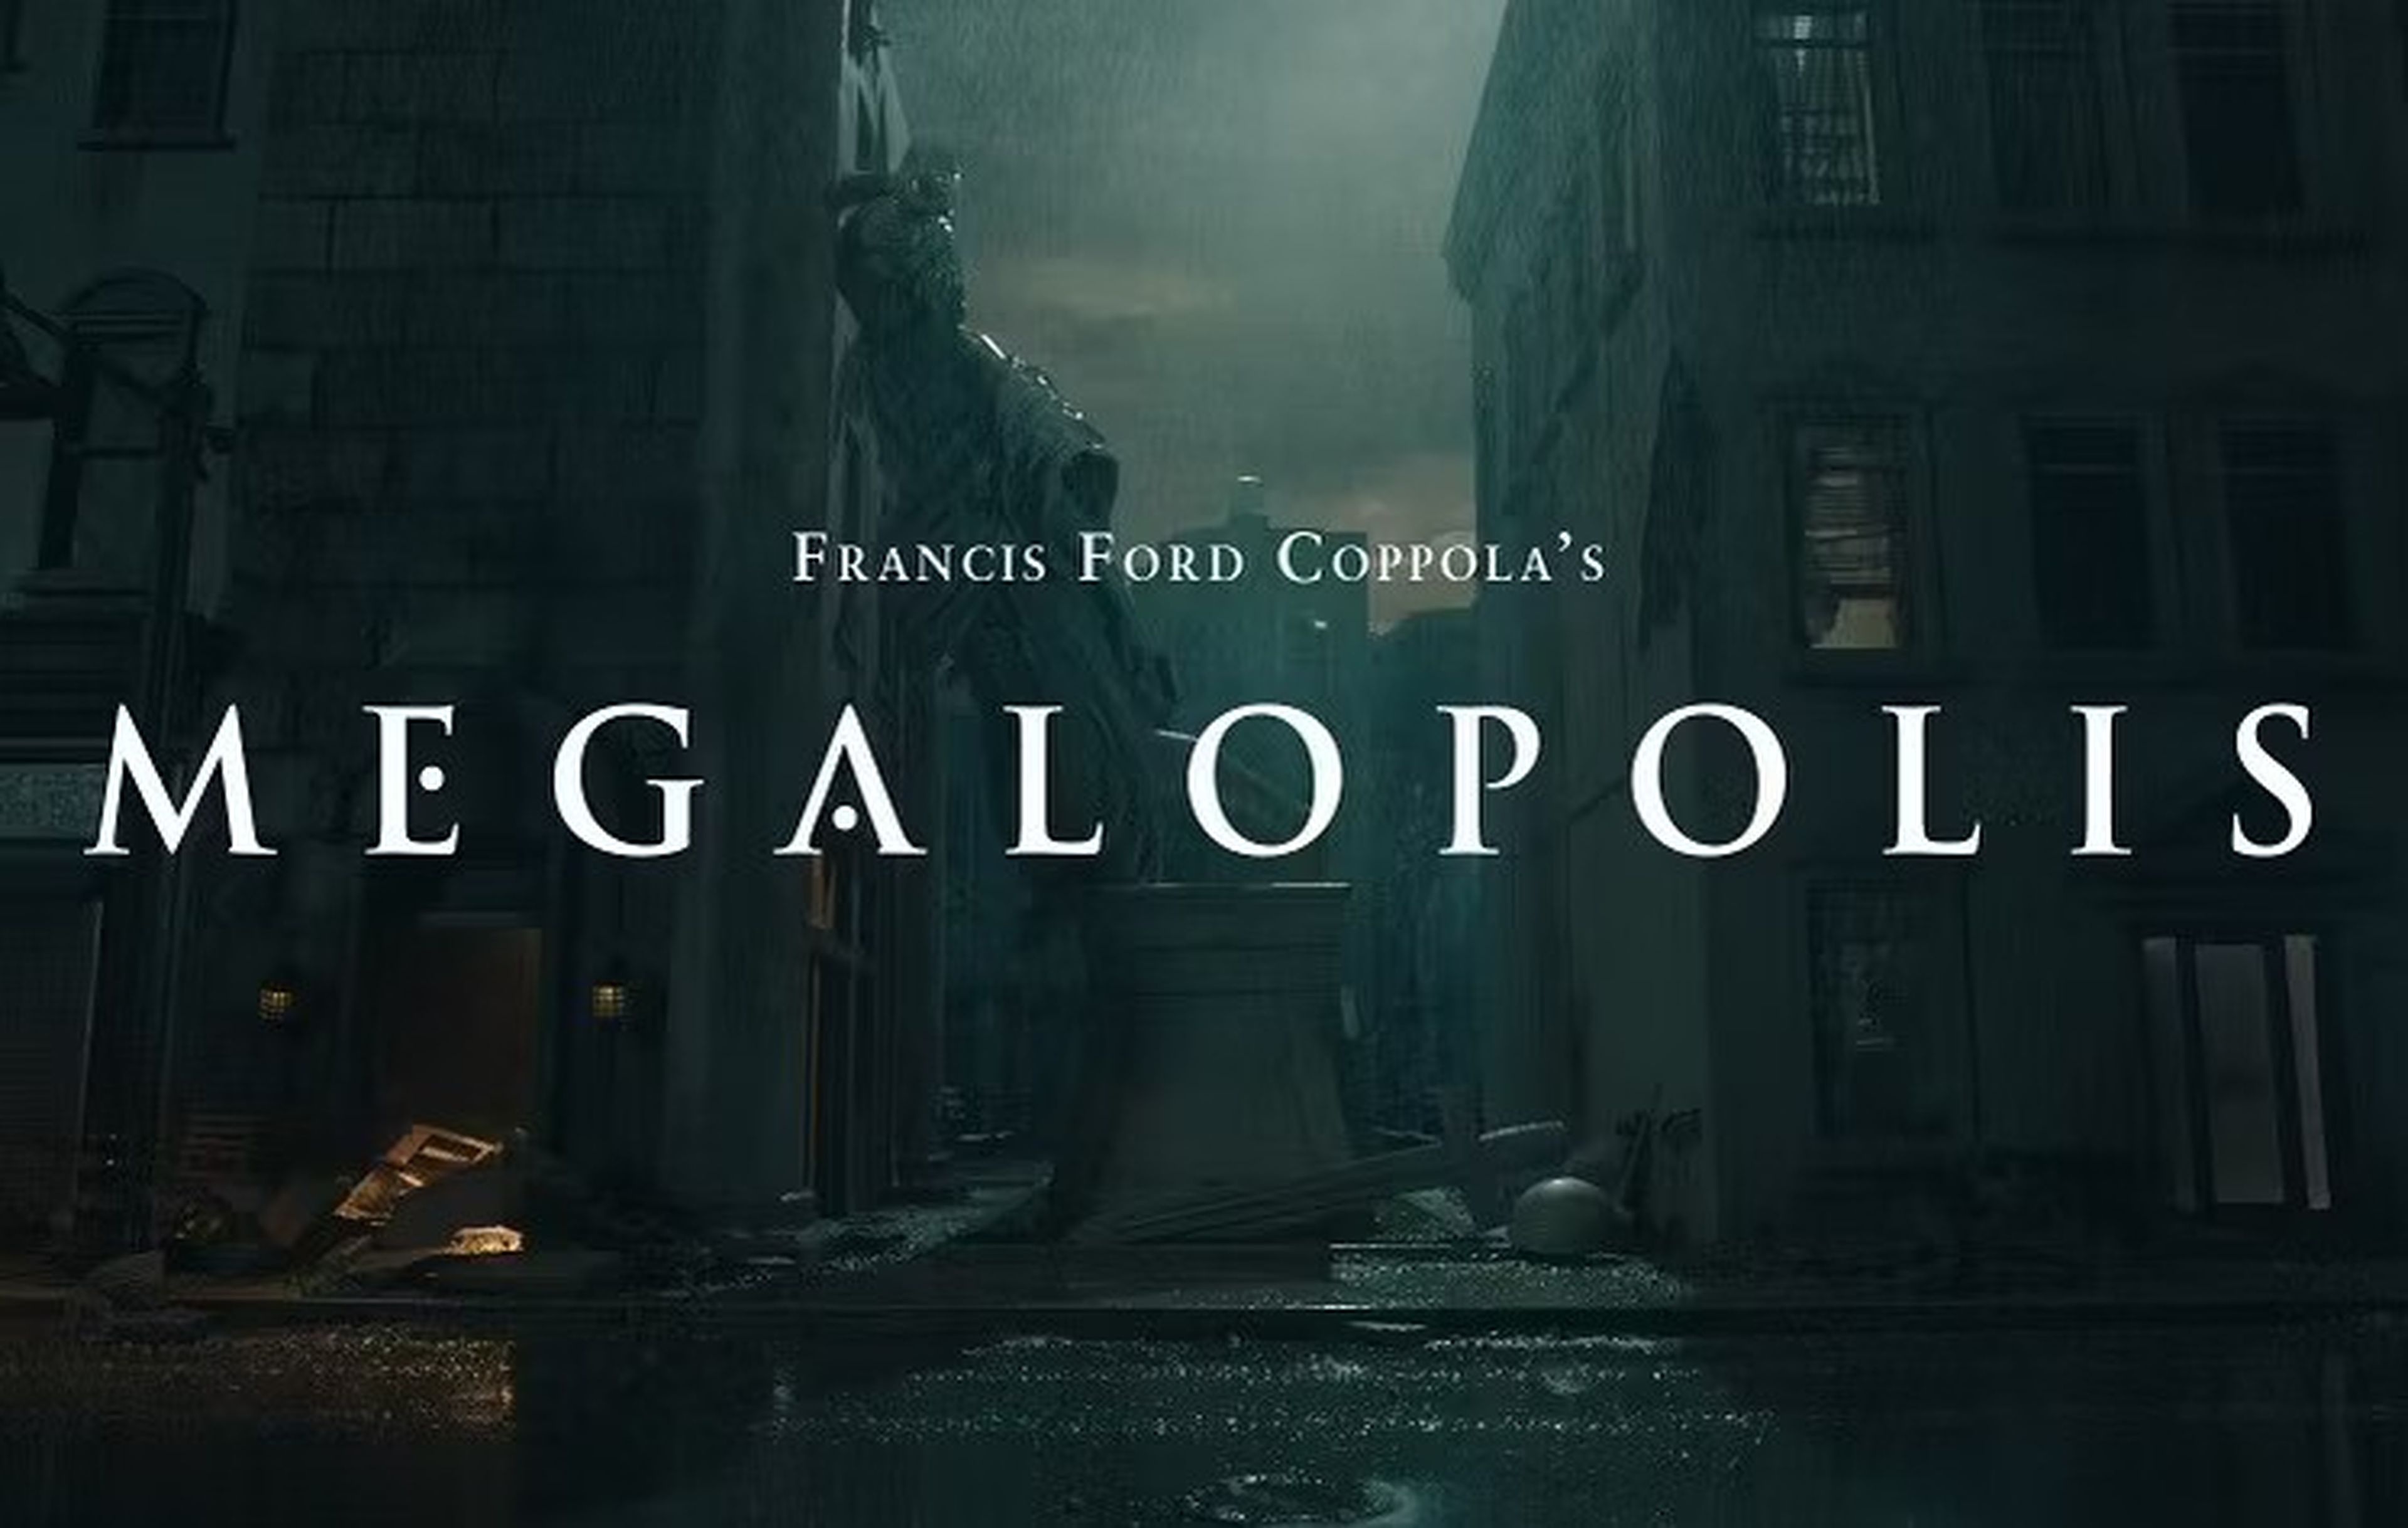 First Look At Megalopolis, Francis Ford Coppola'S New Film